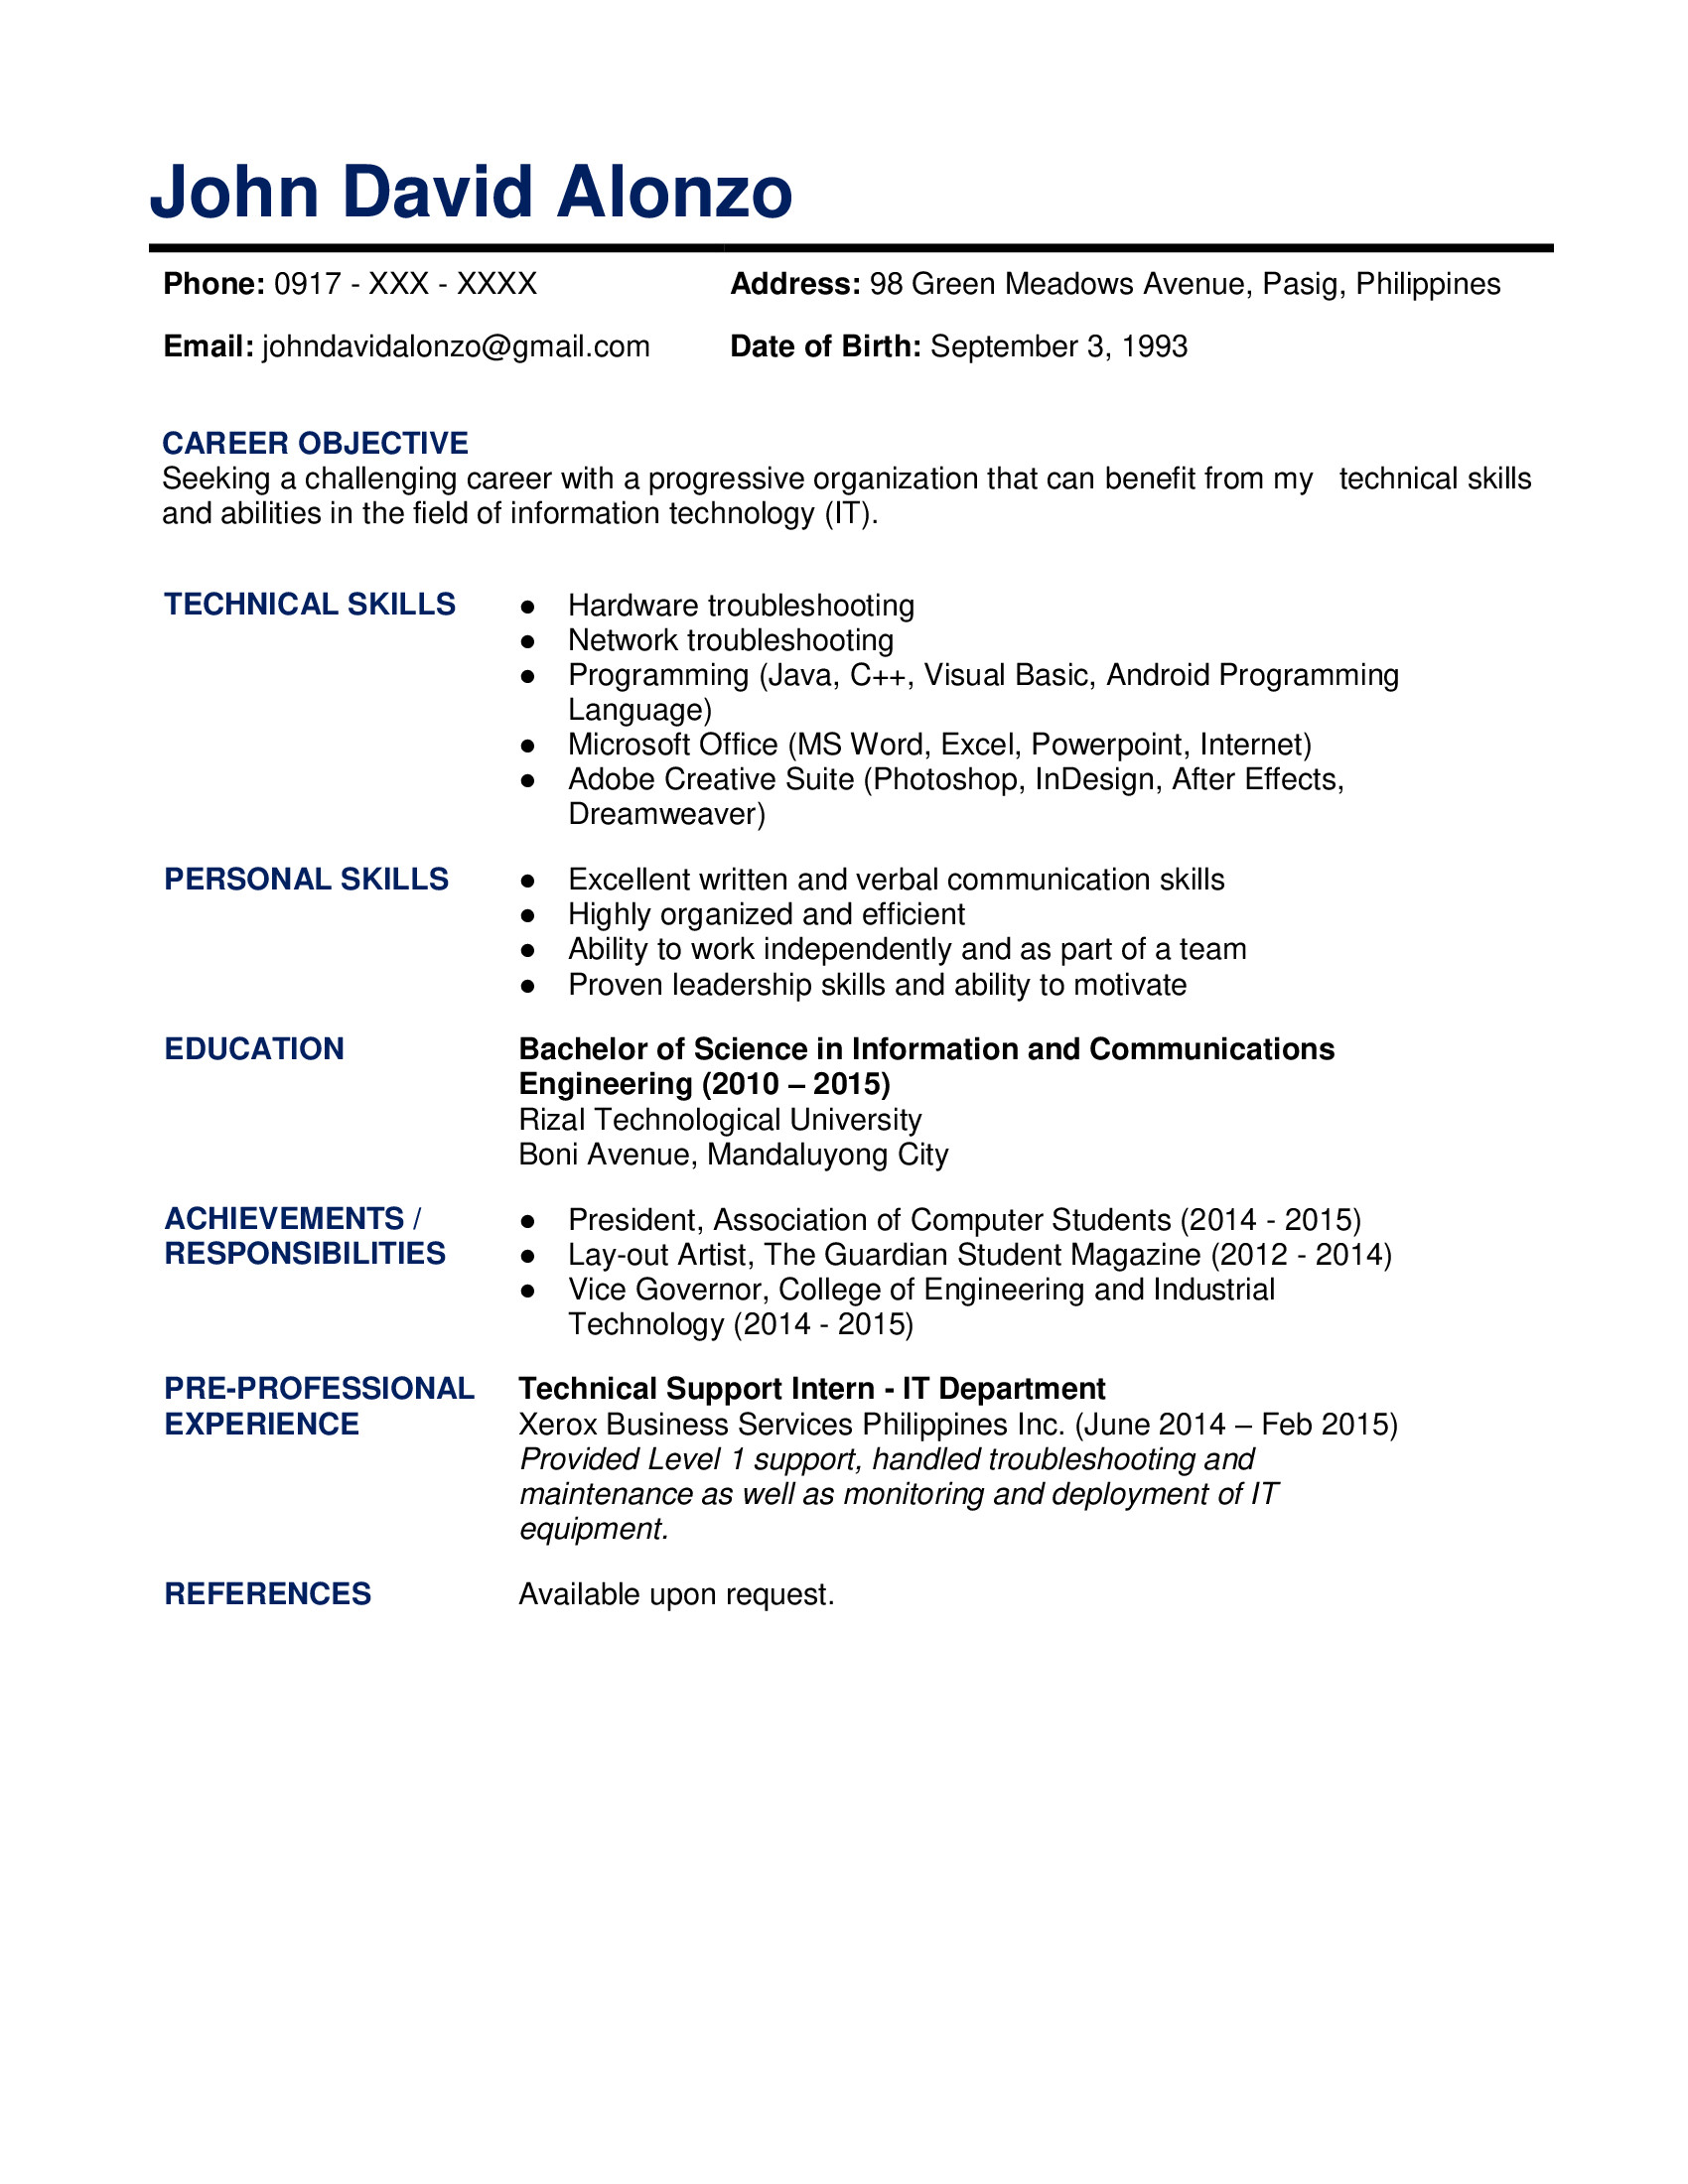 First Time Resume with No Experience Sample Philippines Sample Resume formats for Fresh Graduates